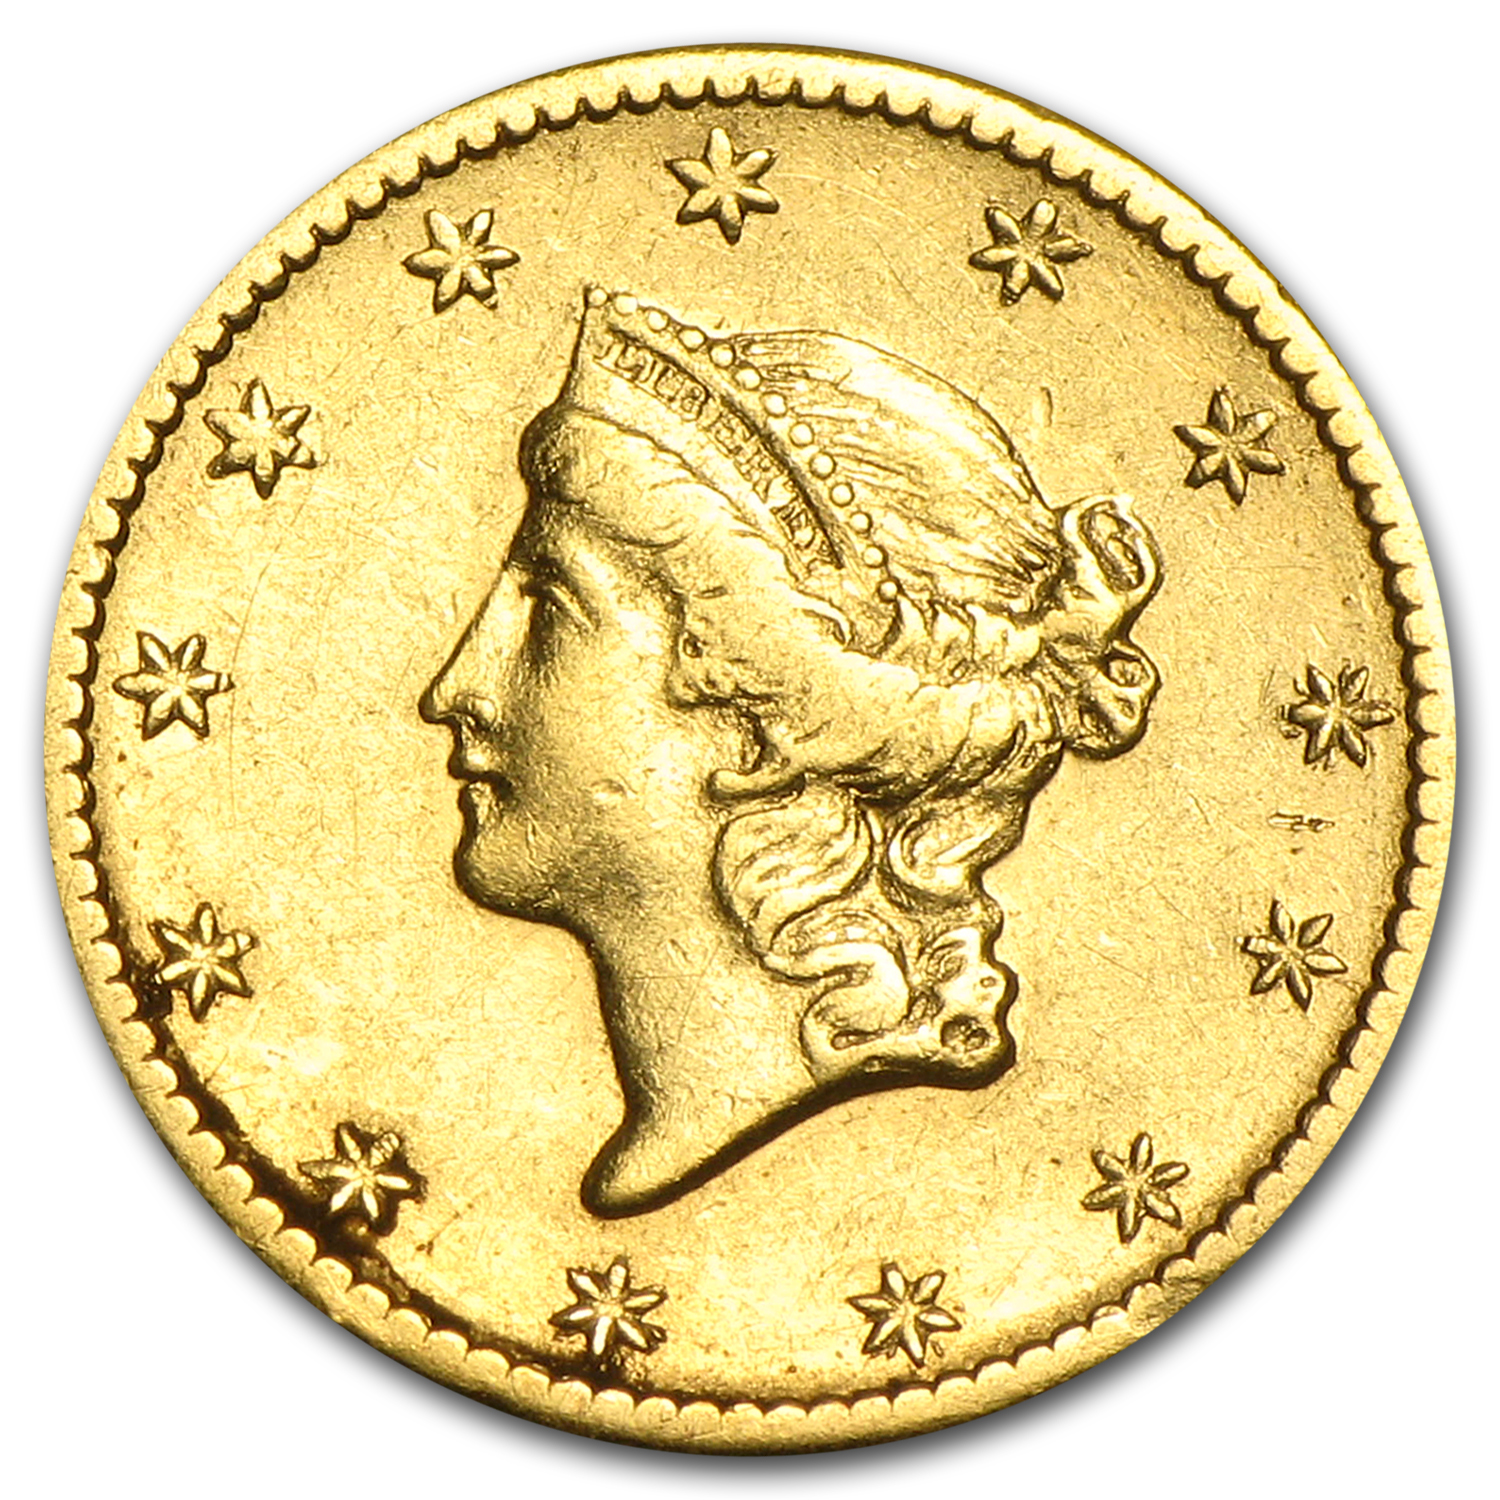 Buy $1 Liberty Head Gold Dollar Type 1 (Cleaned)